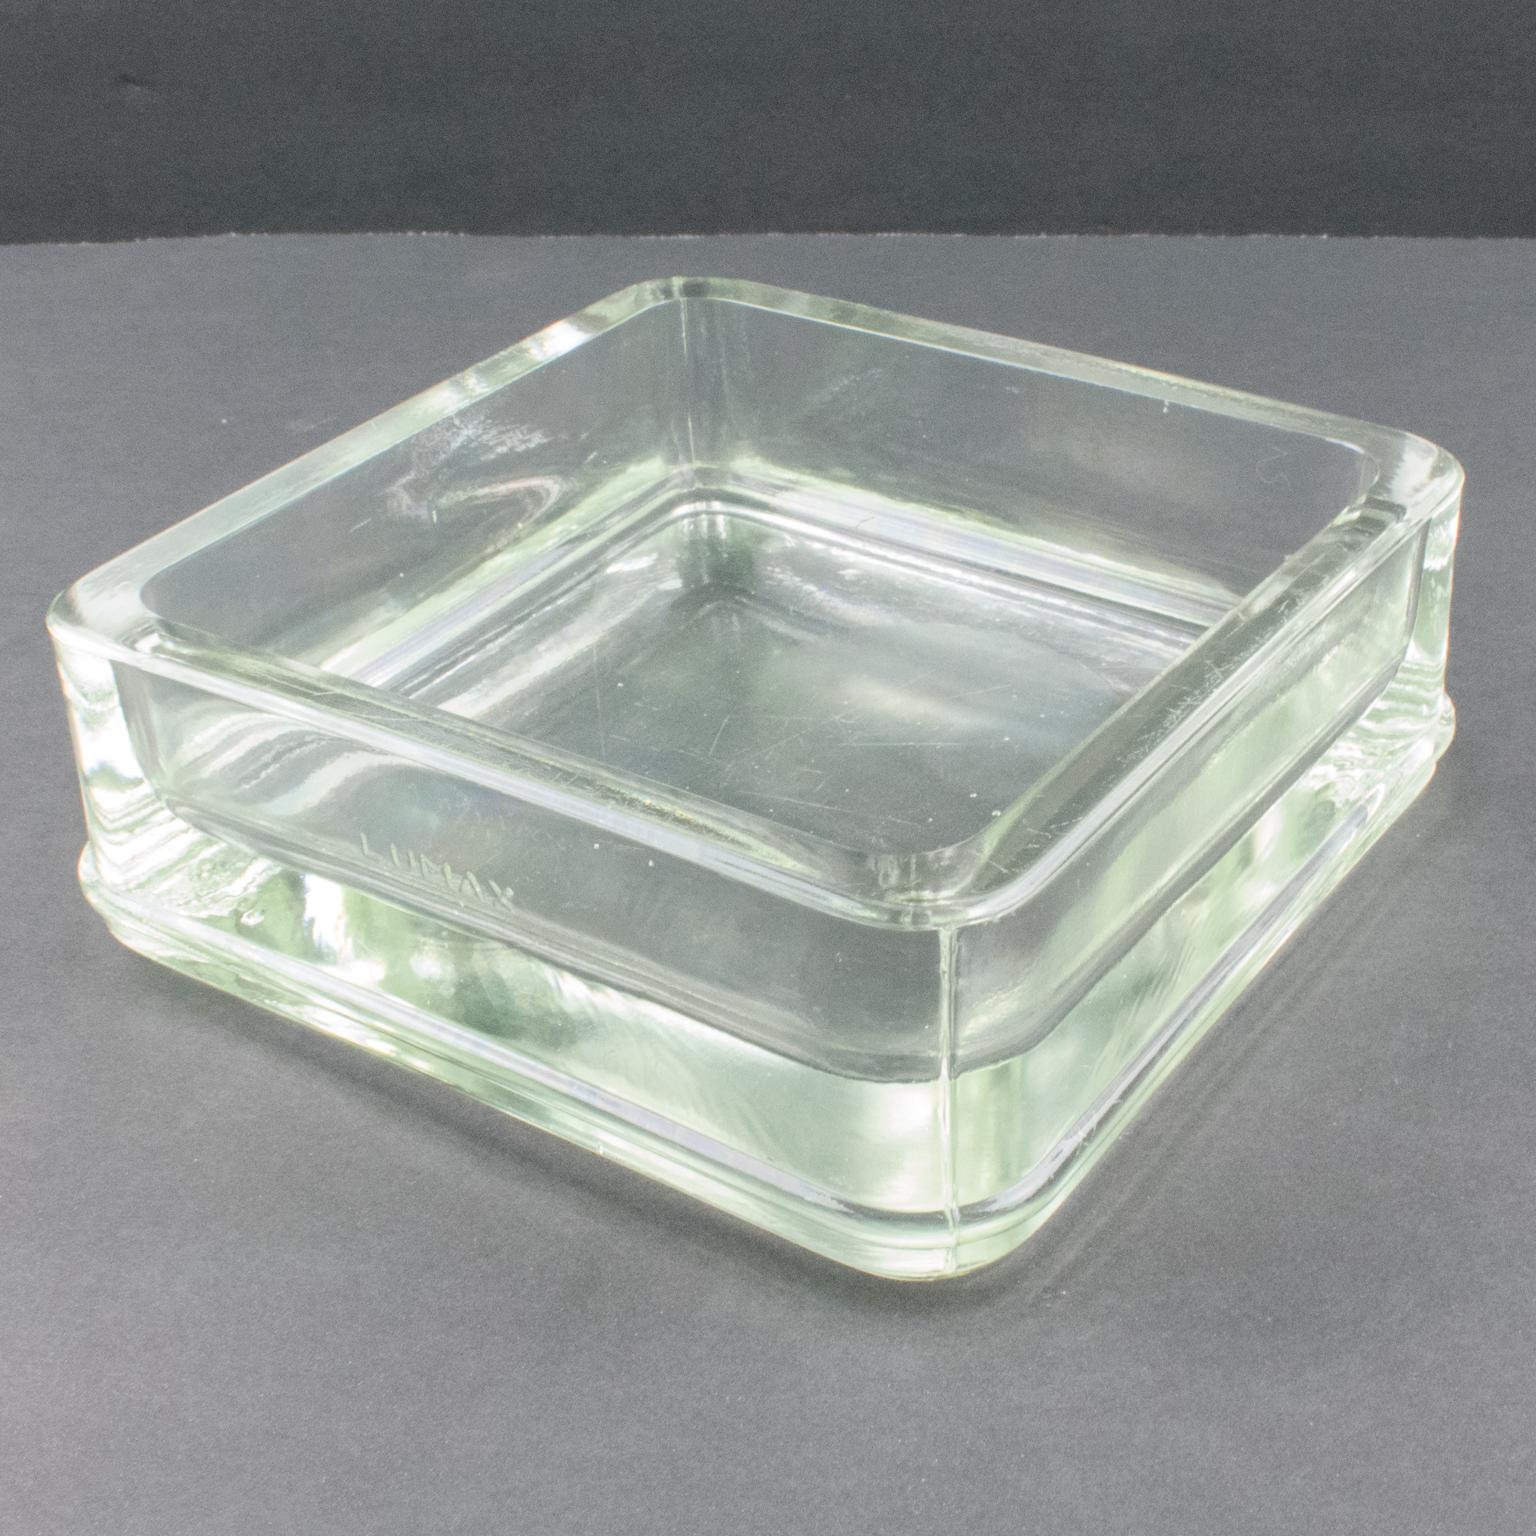 Industrial thick molded glass desktop accessory (desk tidy, cigar ashtray or catchall) manufactured by Lumax, France. Original design by Le Corbusier. Engraved company logo on the side. 
Measurements: 5.94 in. wide (15 cm) x 5.94 in. deep (15 cm) x